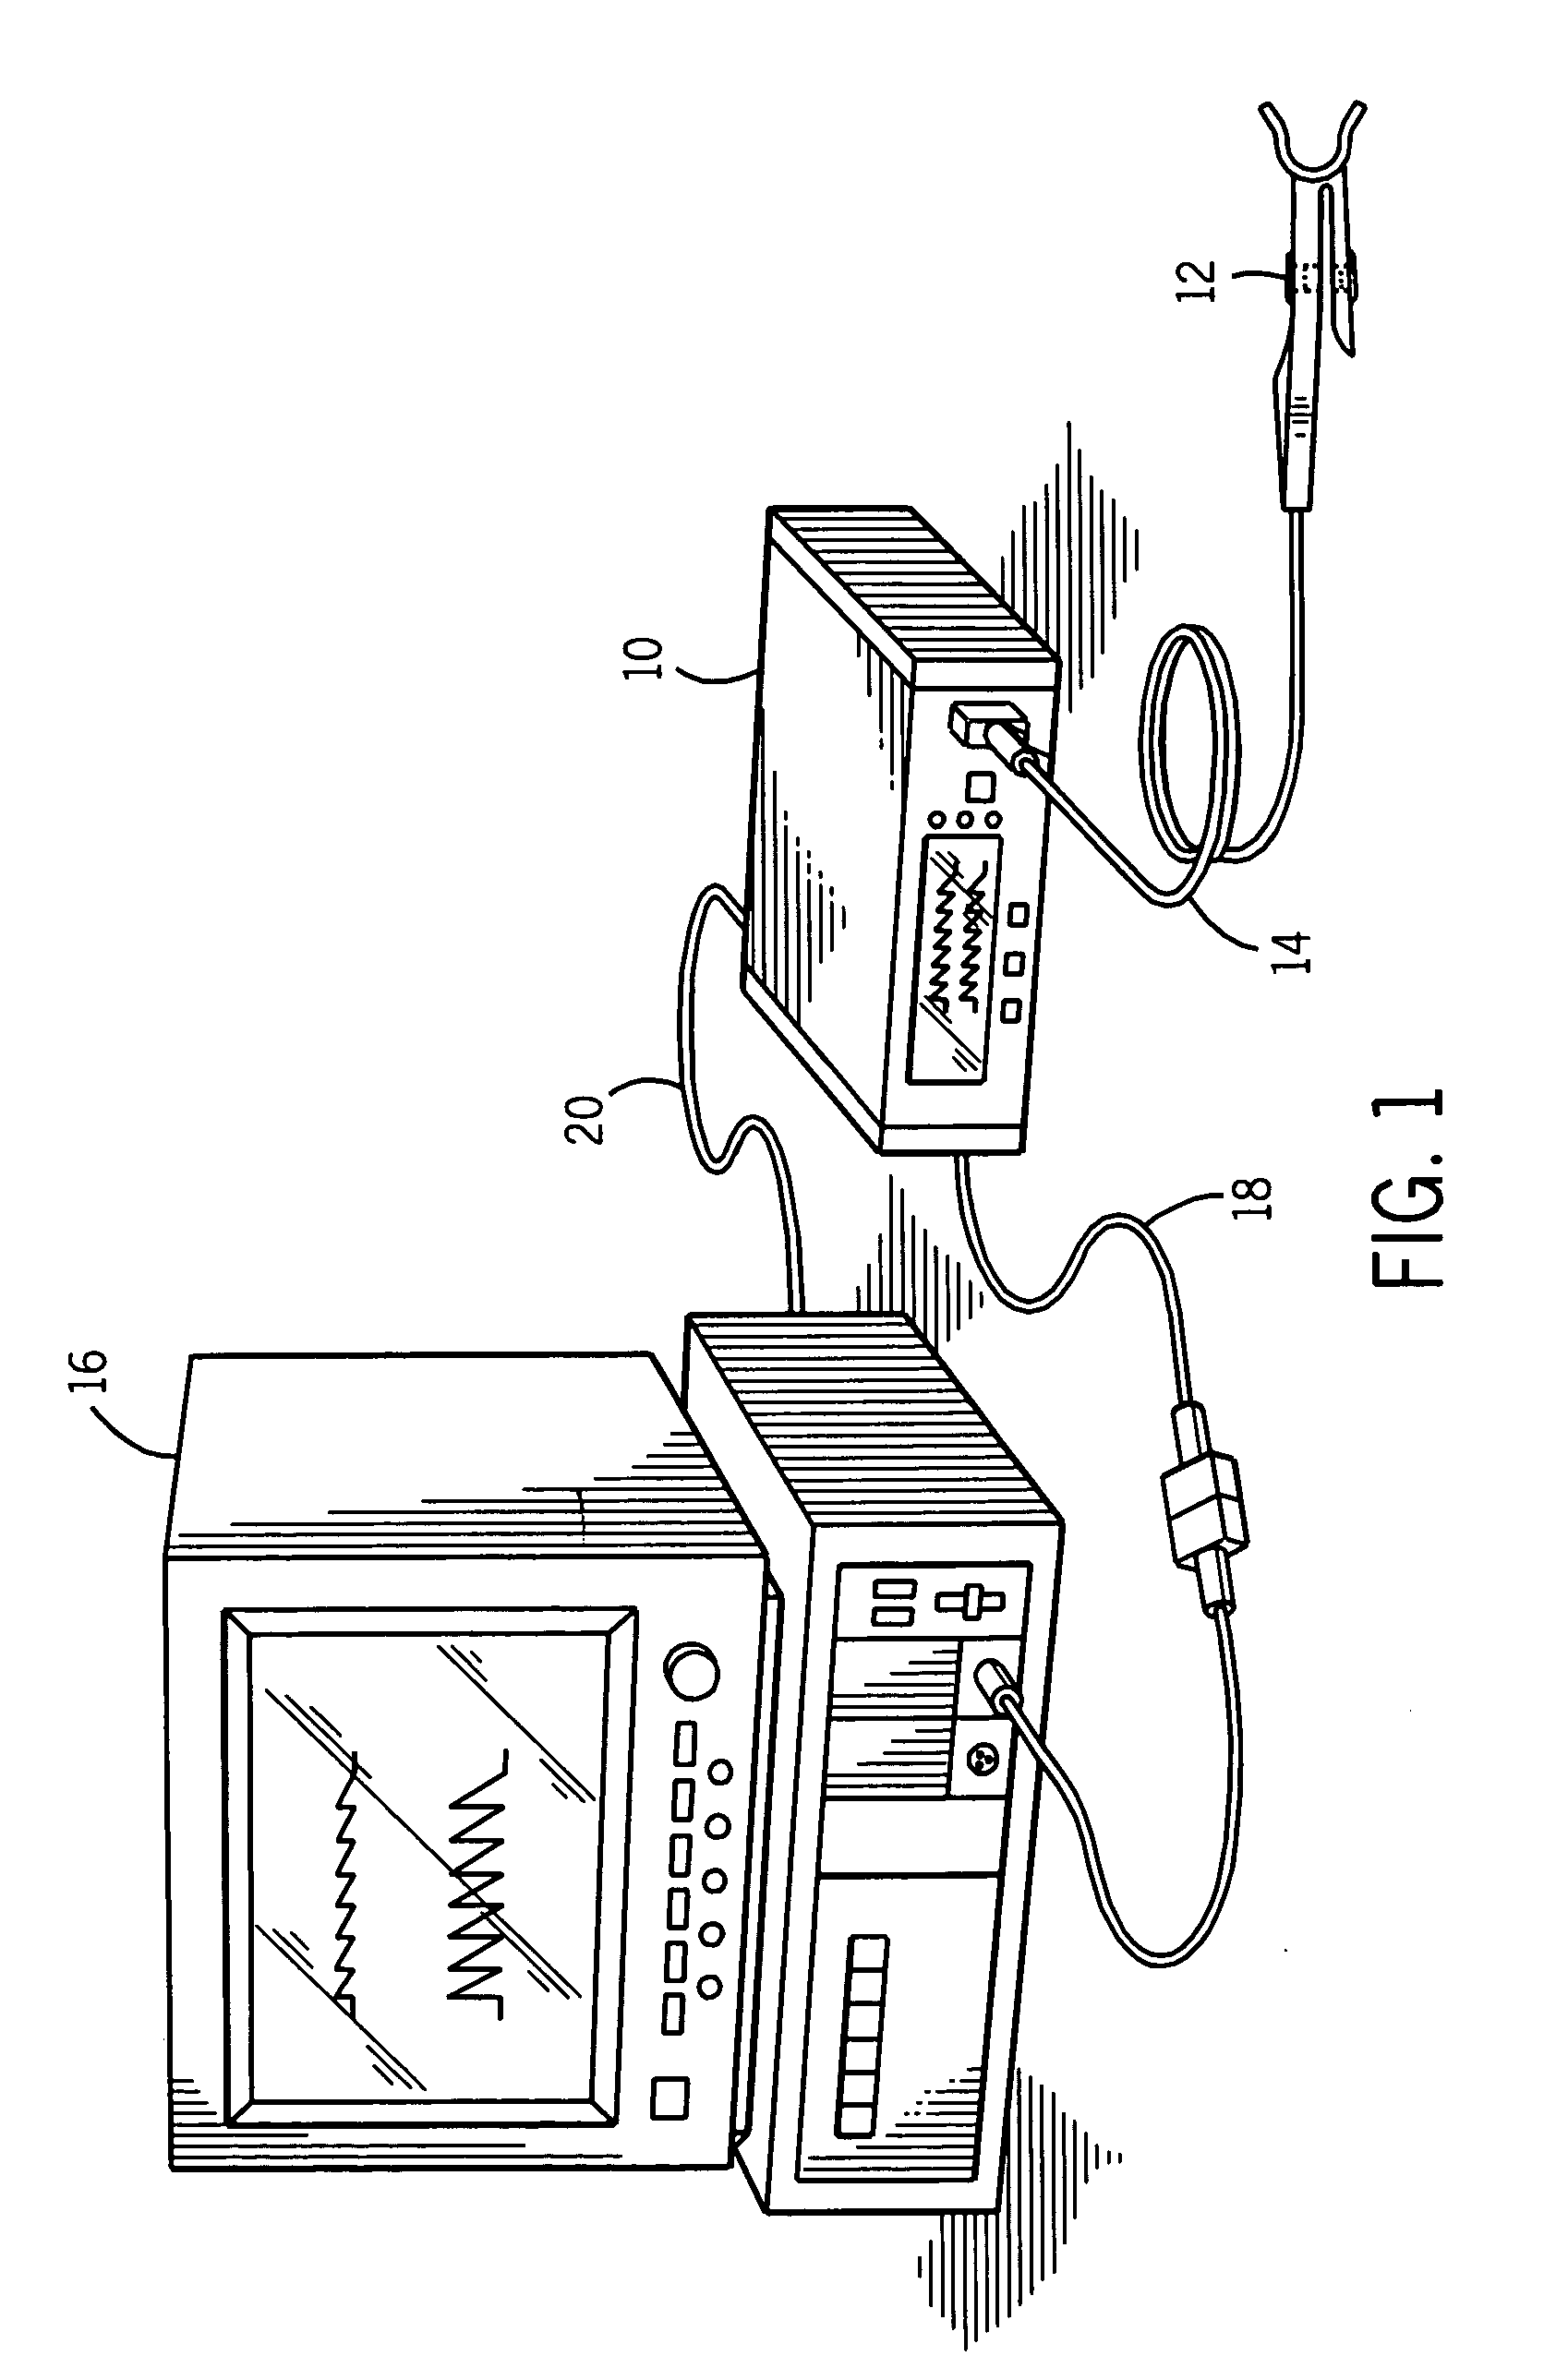 Method and apparatus for detection of venous pulsation